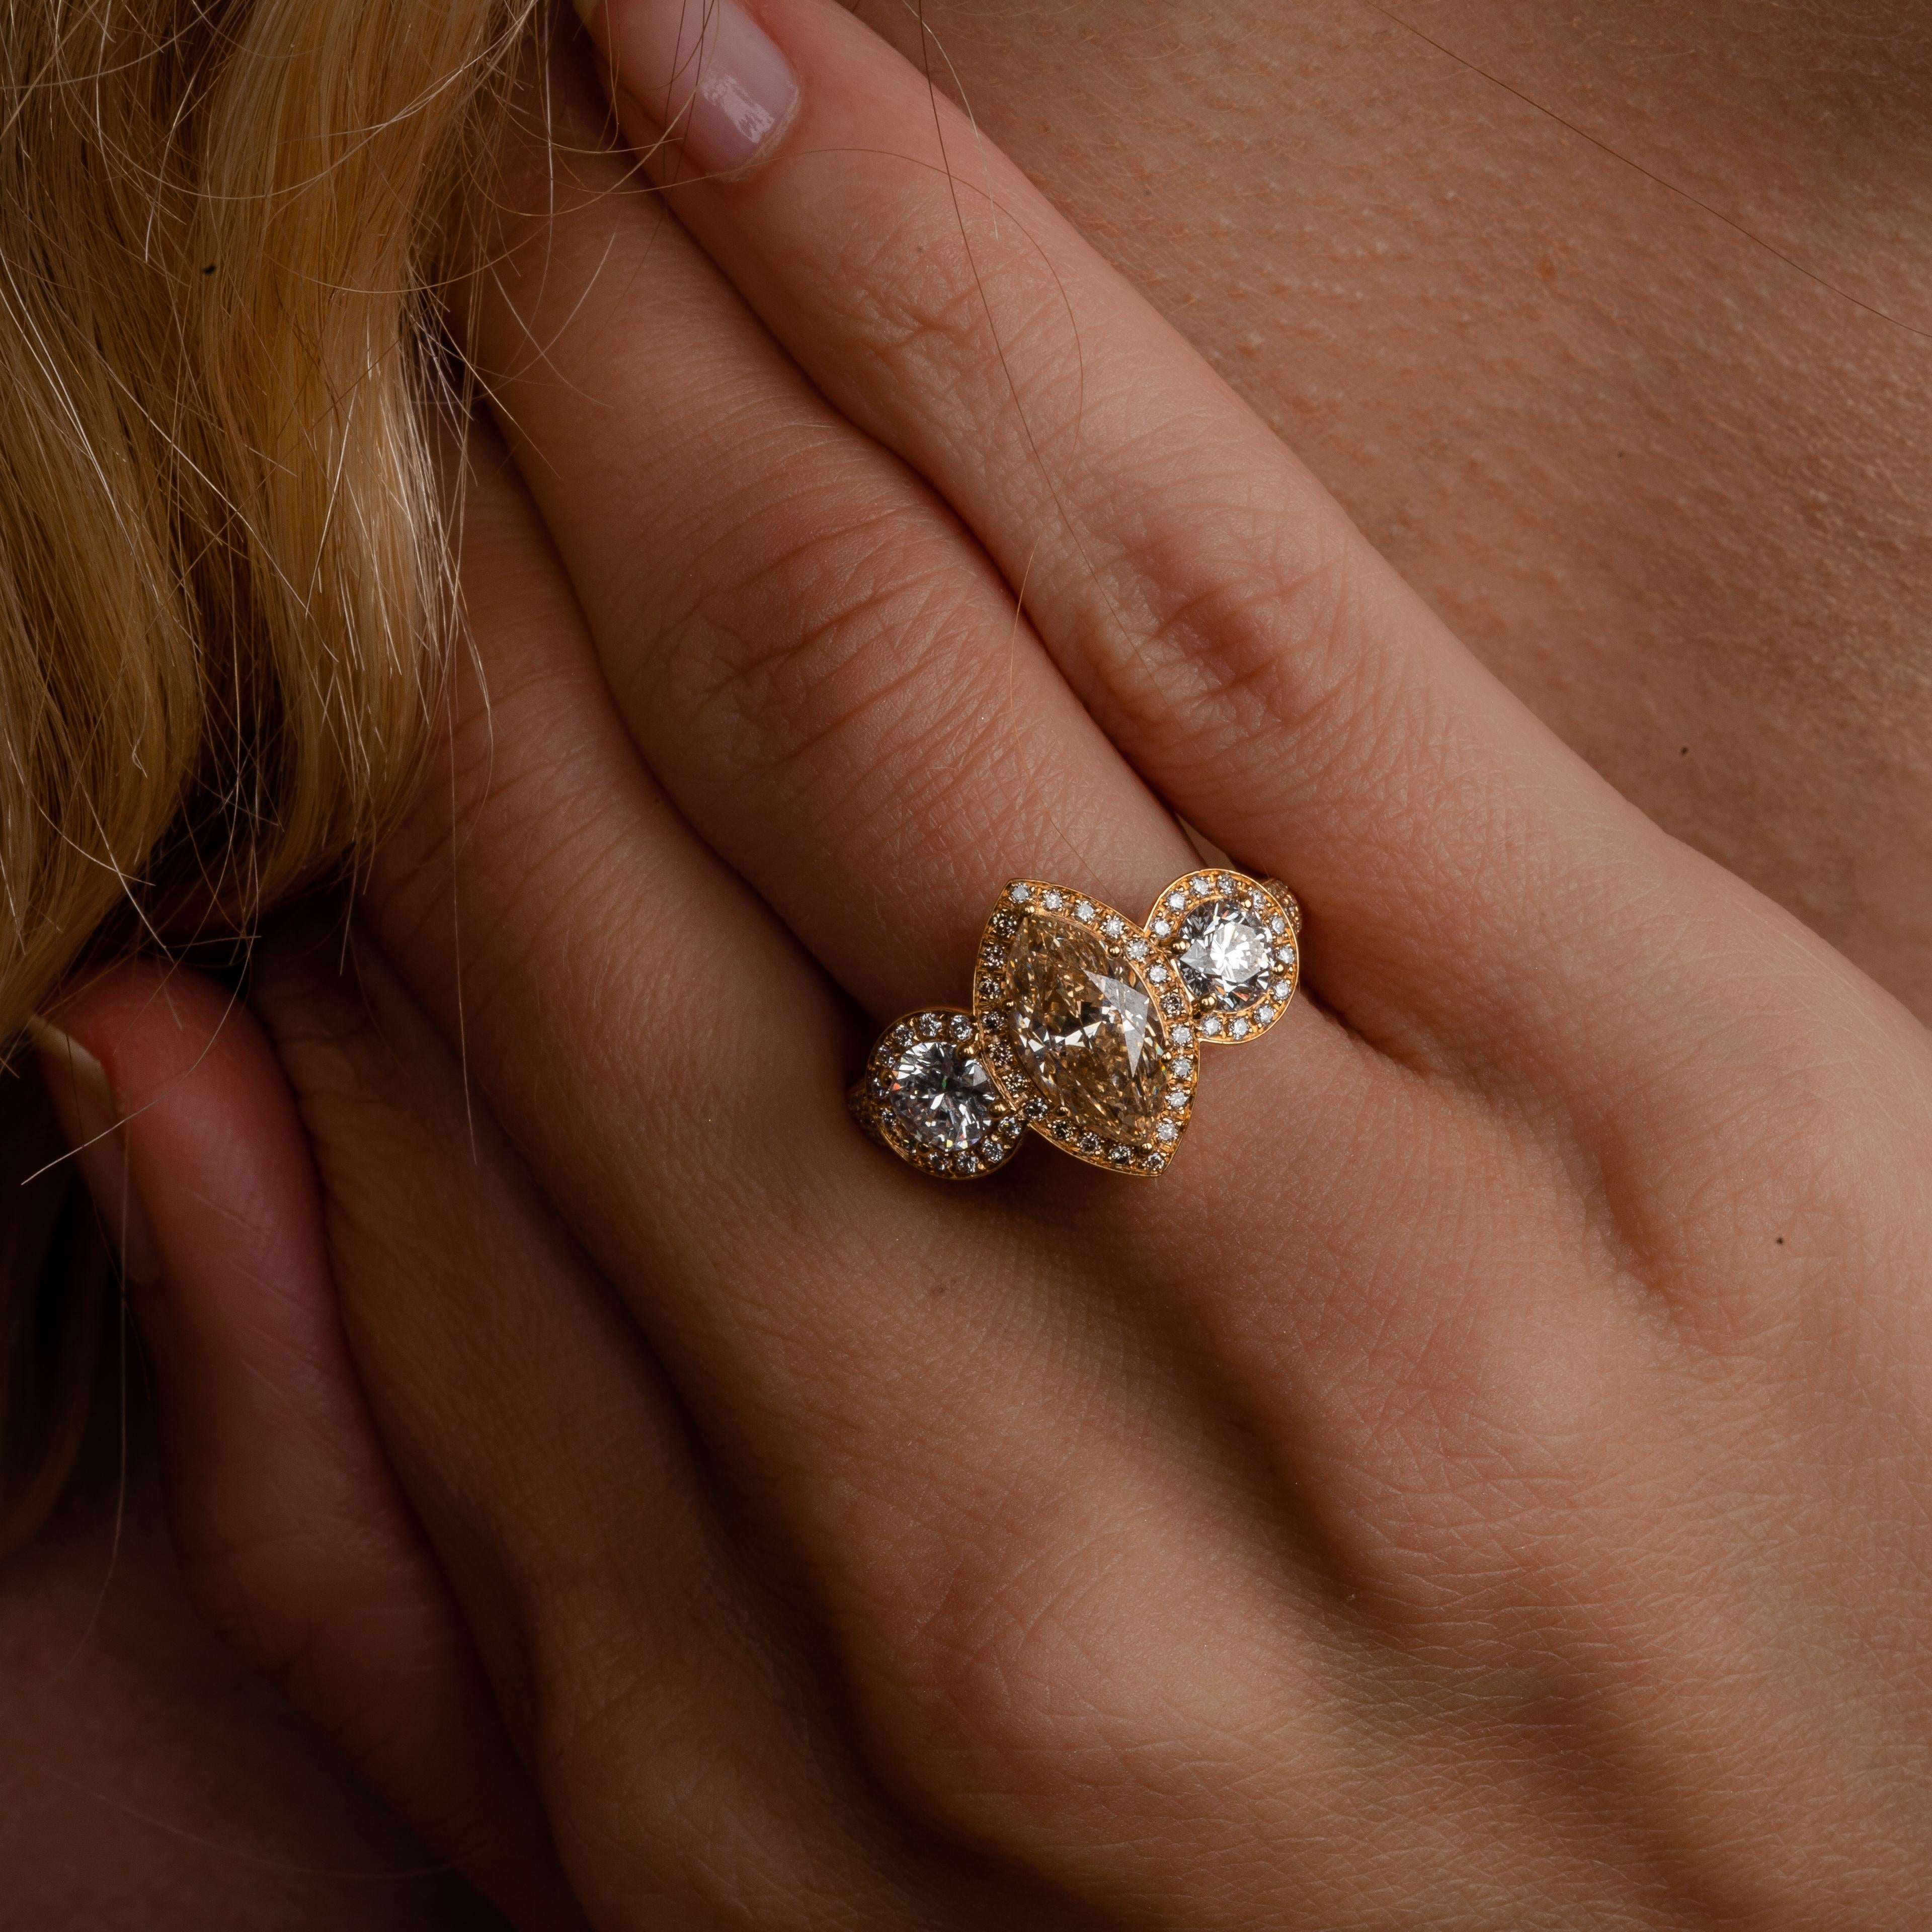 This 18K rose gold elegant cocktail ring is from our Divine Collection. It is made of a 3 stones,  marquise shape brown diamond in total of 2.06 Carat and 2 round shape colorless diamonds in total of 0.50 Carat each. All 3 diamonds are decorated by